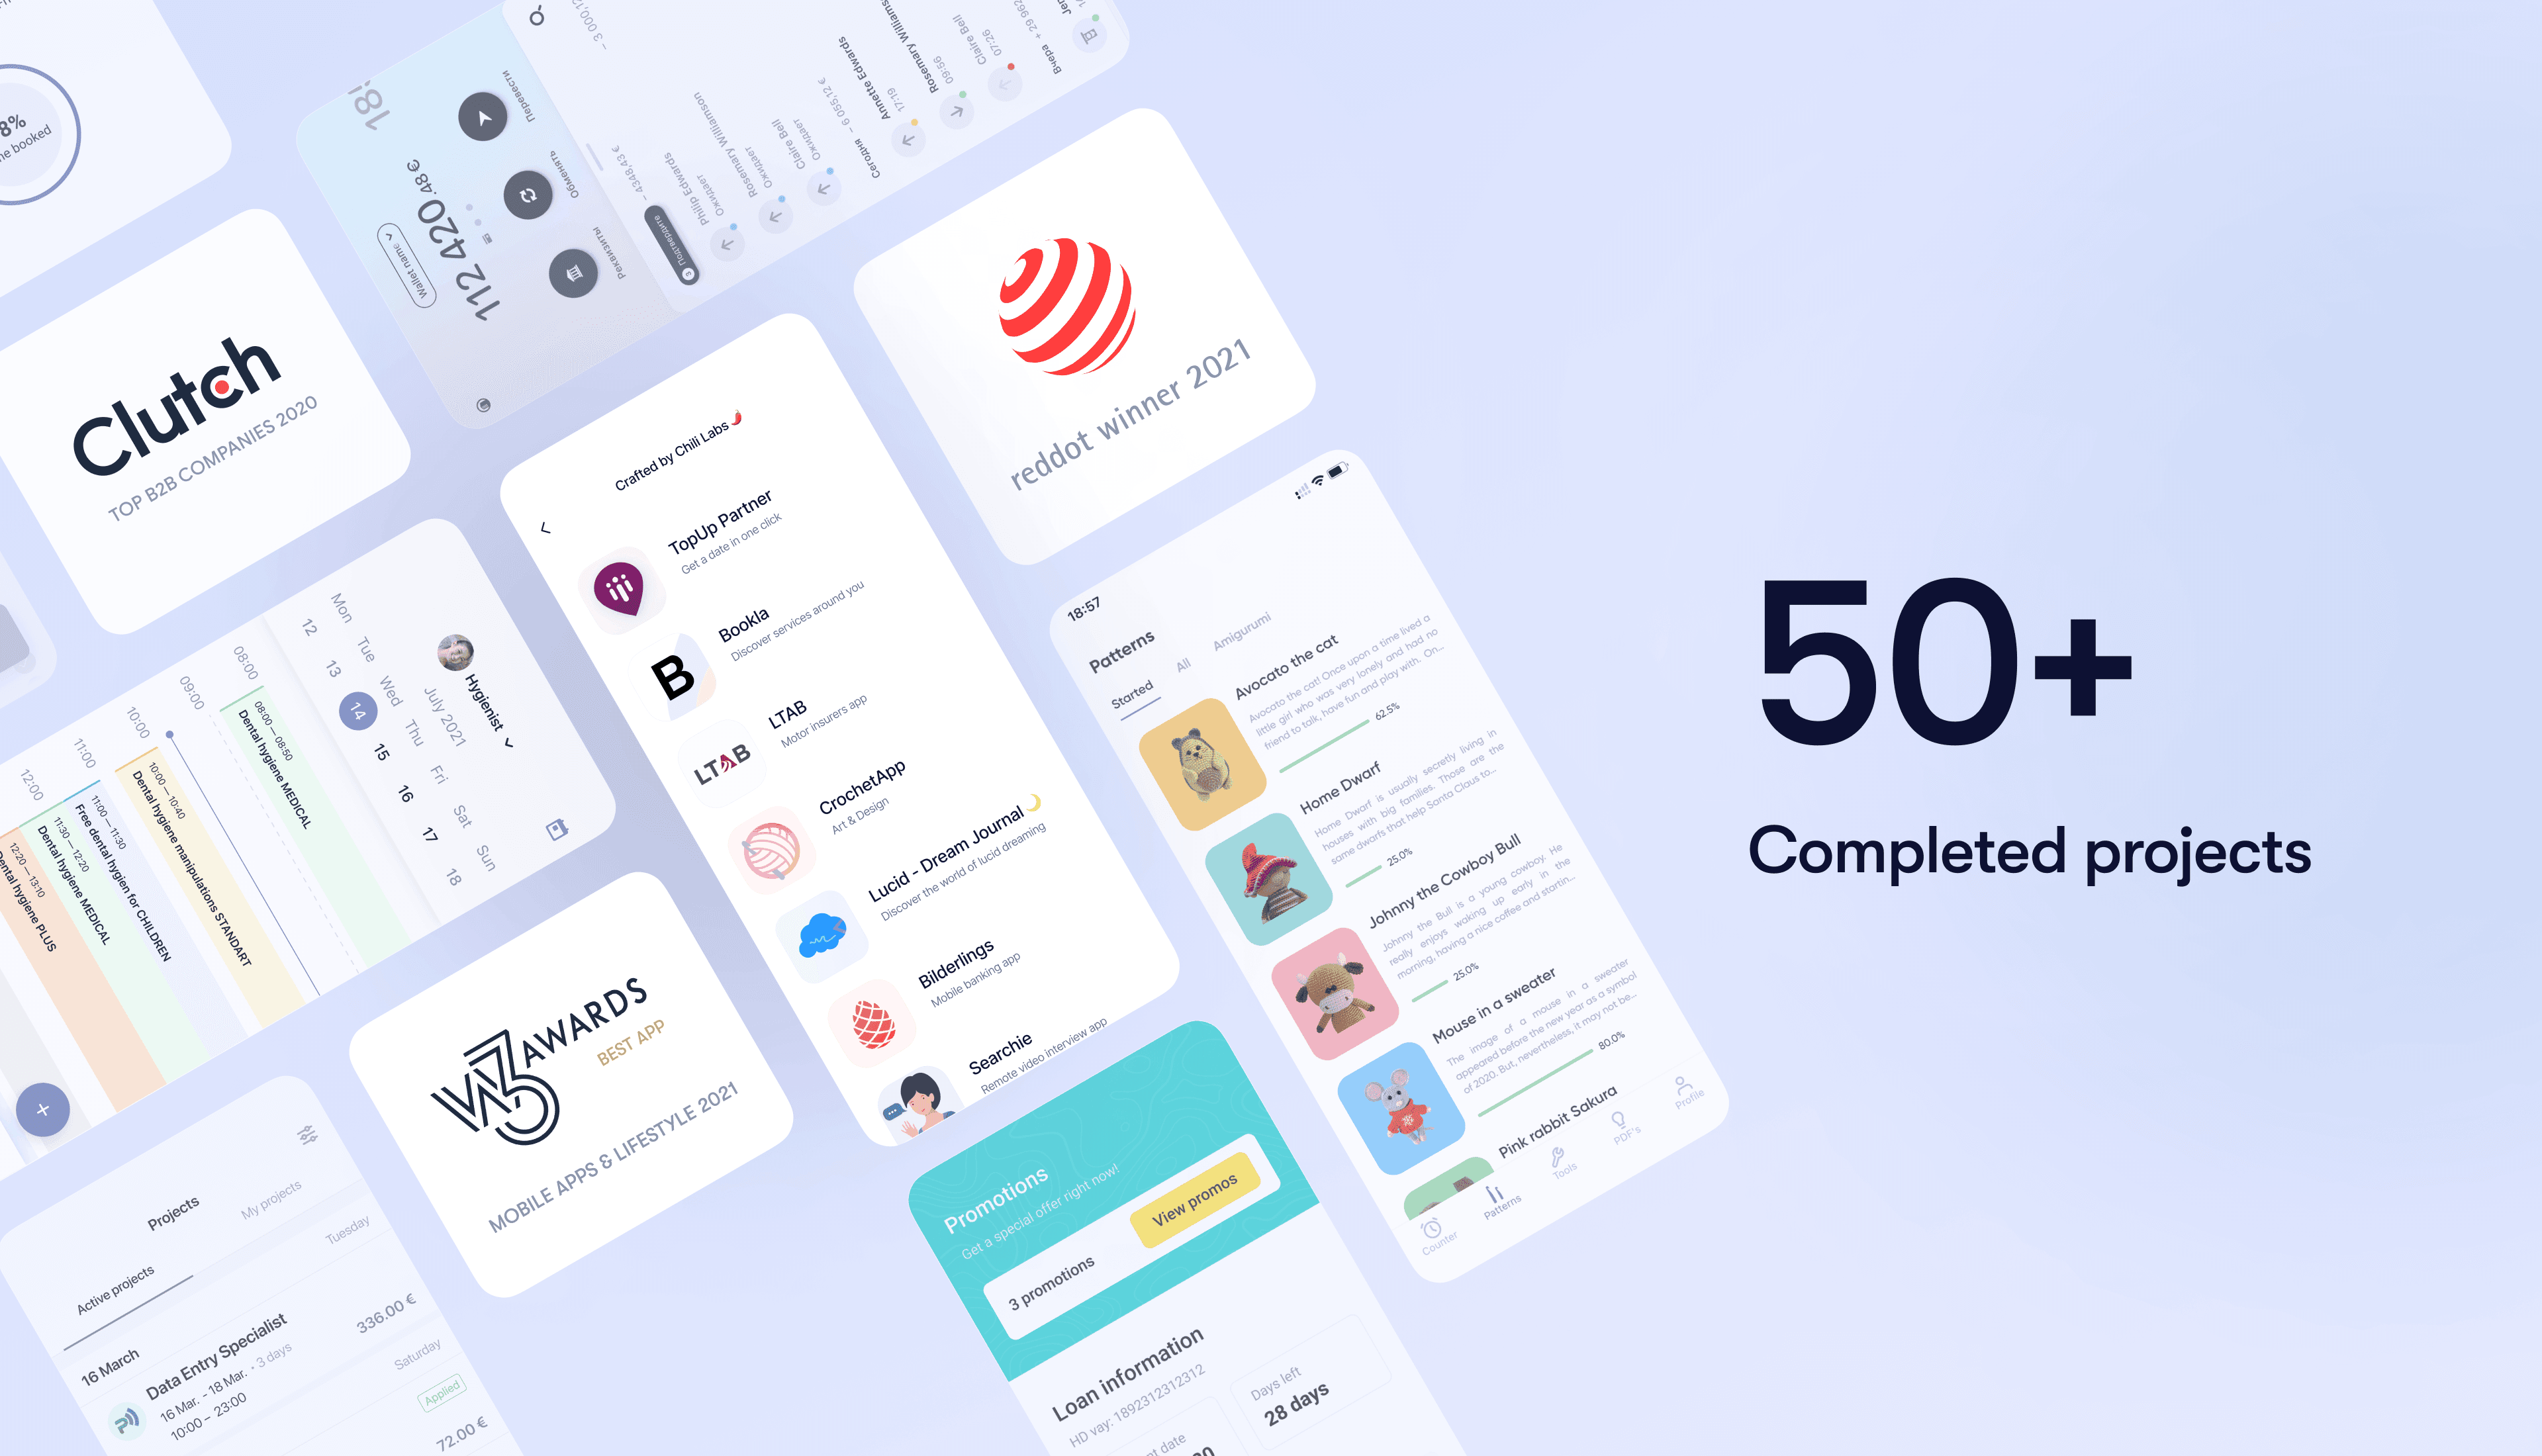 Over 50 completed mobile app screens are displayed on a white background